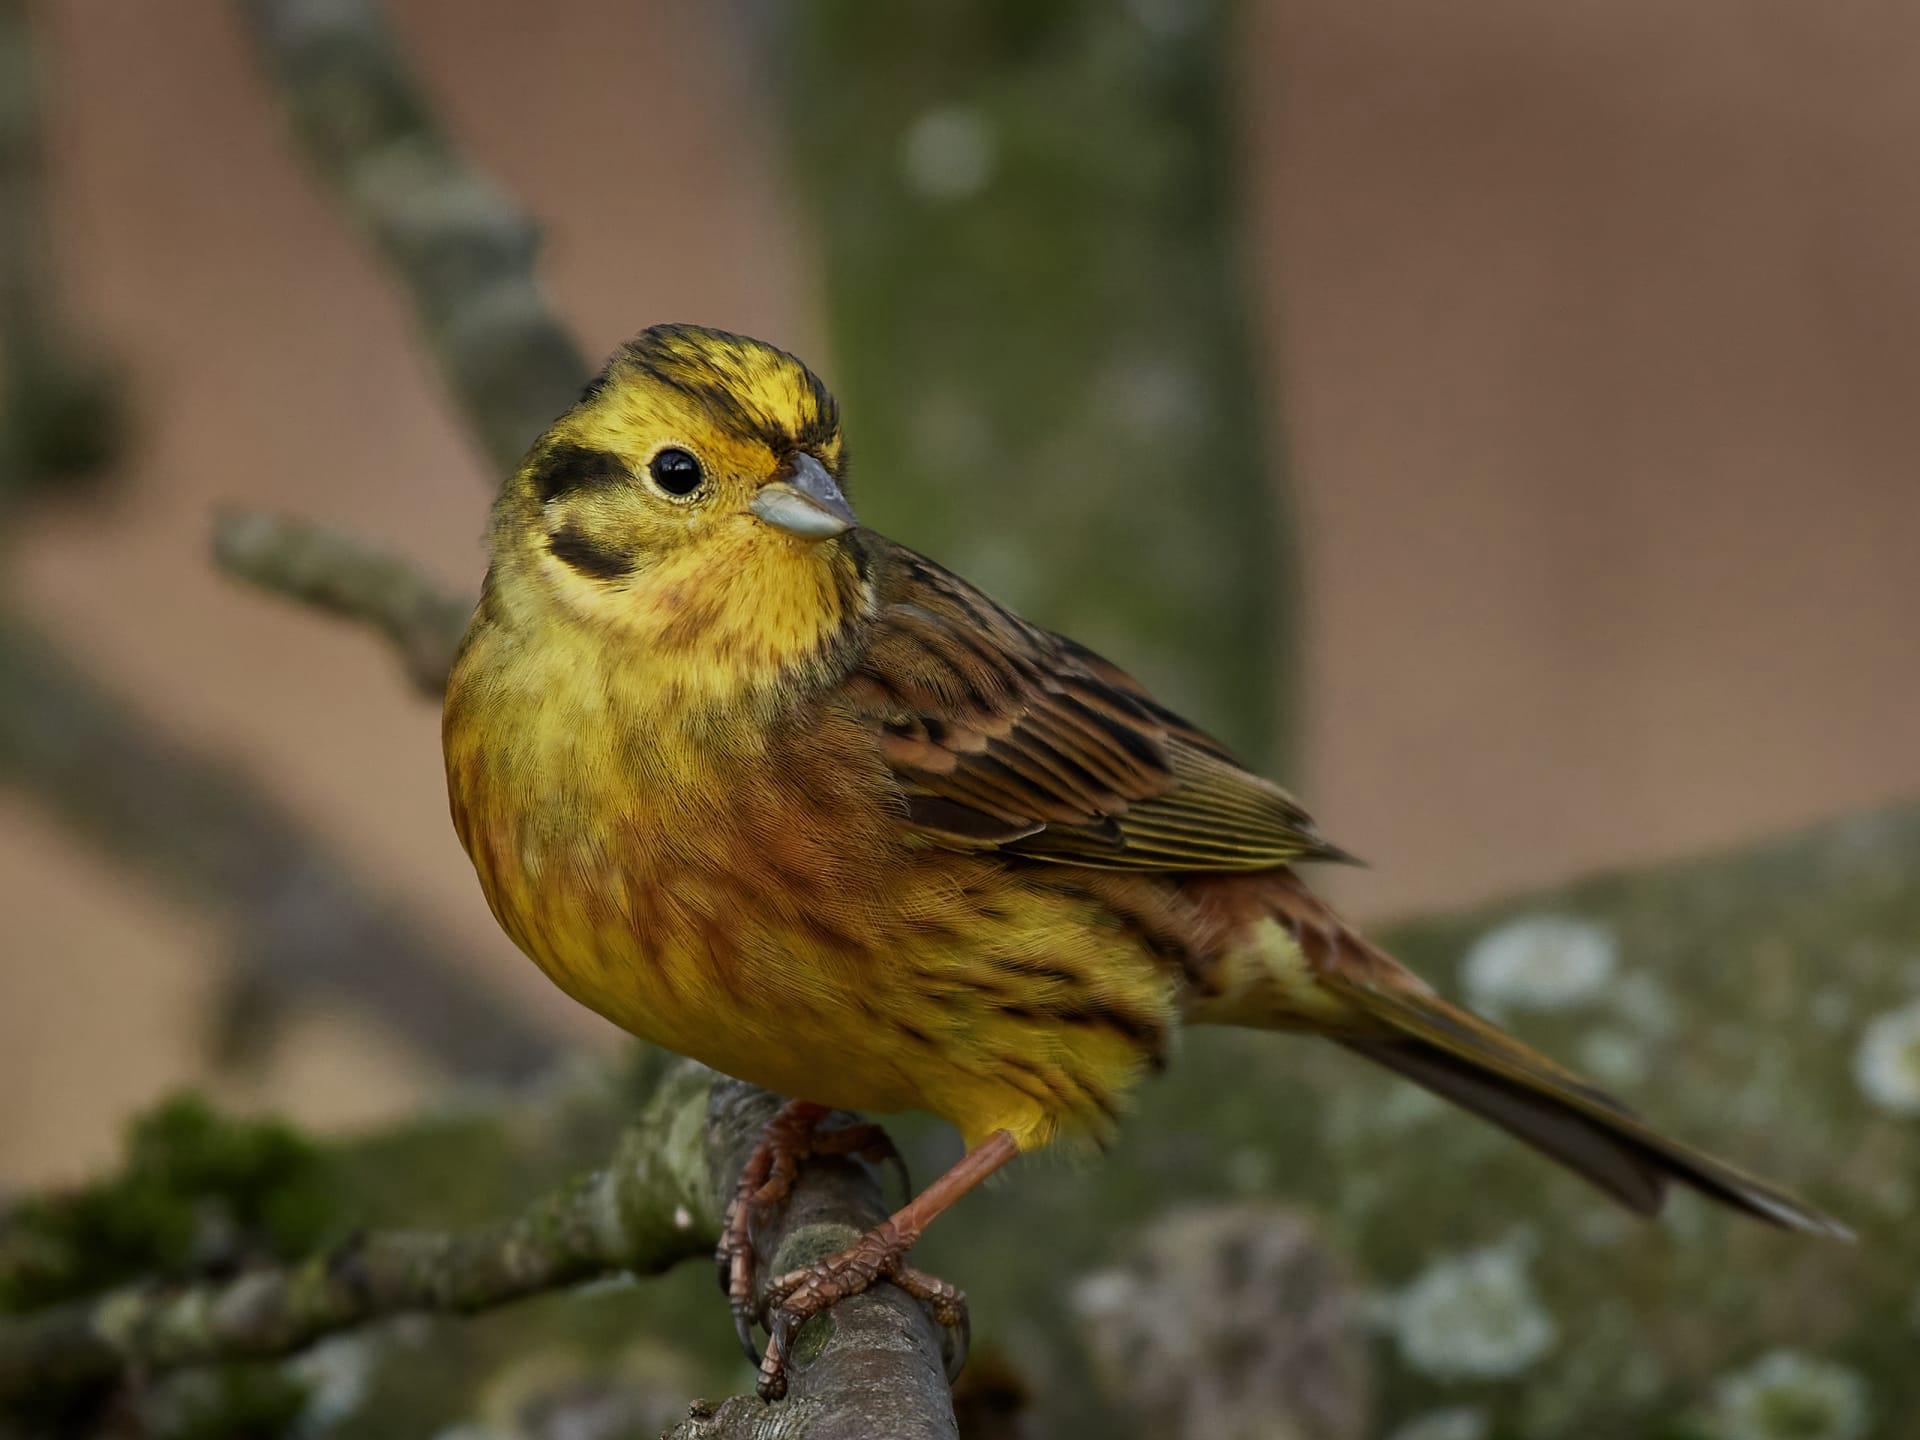 Yellowhammer pictures